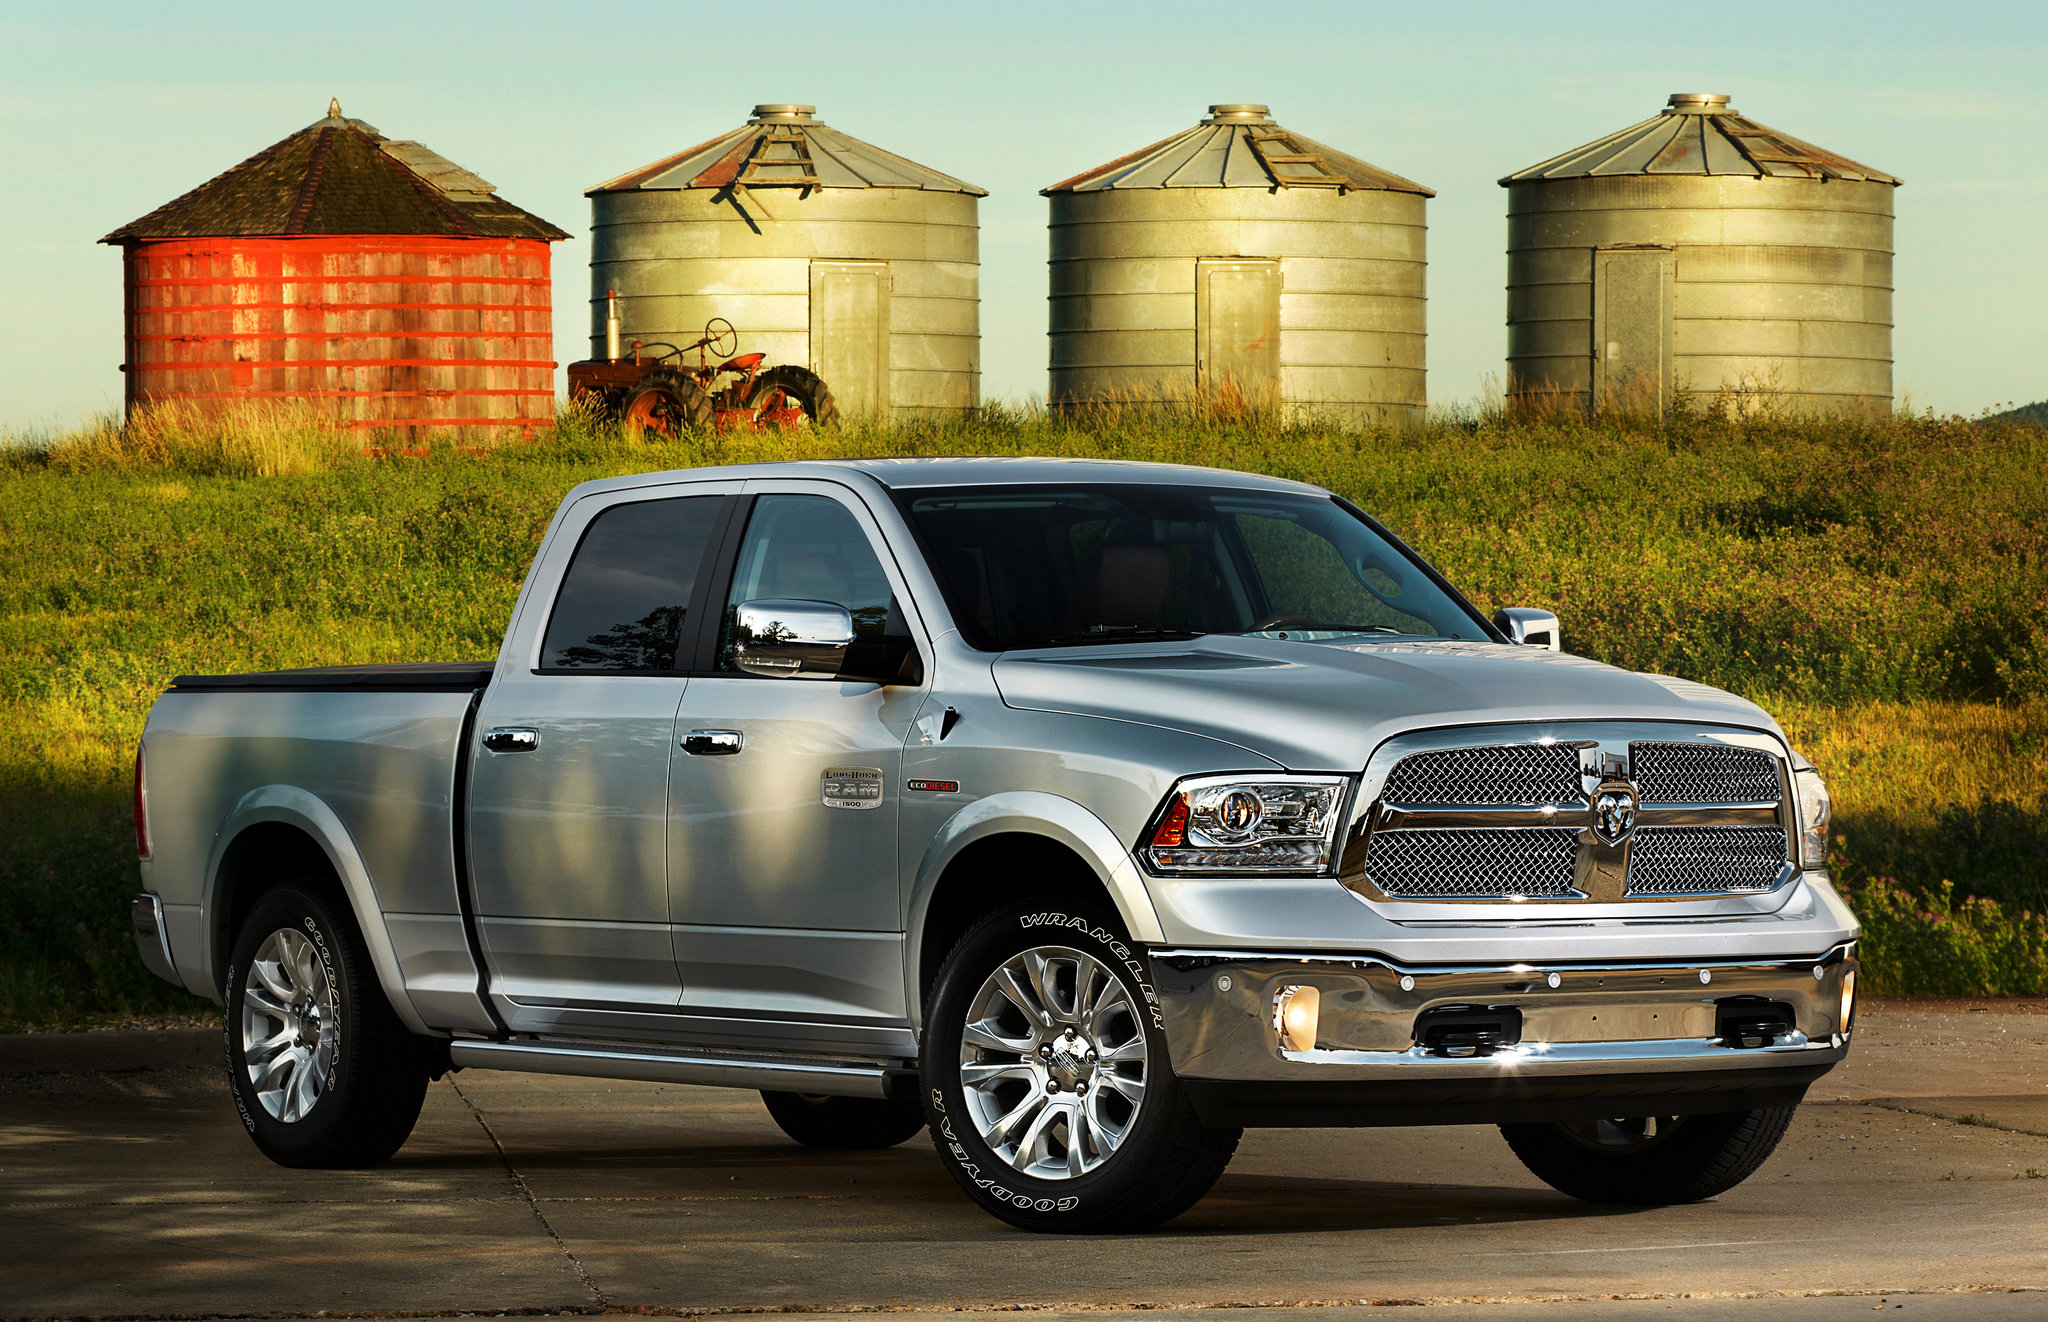 Owner Review - Ram Ecodiesel L - General Chat - Red Power Magazine Community